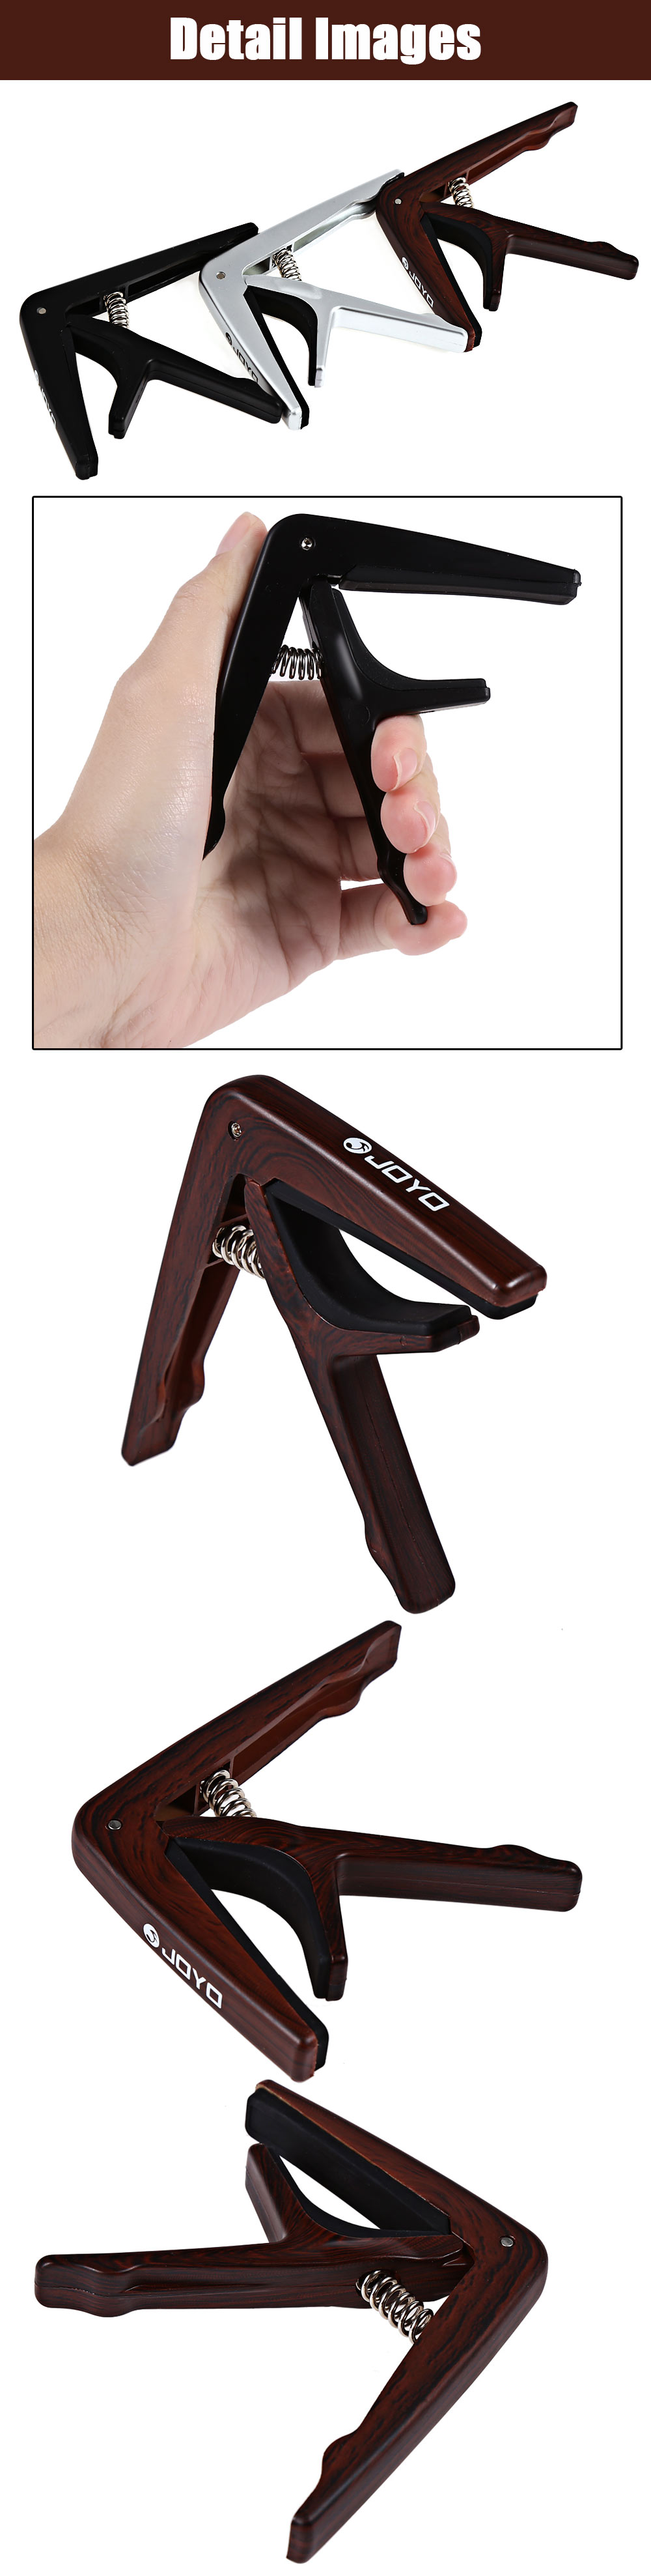 JOYO JCP - 01 Light Professional Capo with Pick for String Acoustic Electric Guitar